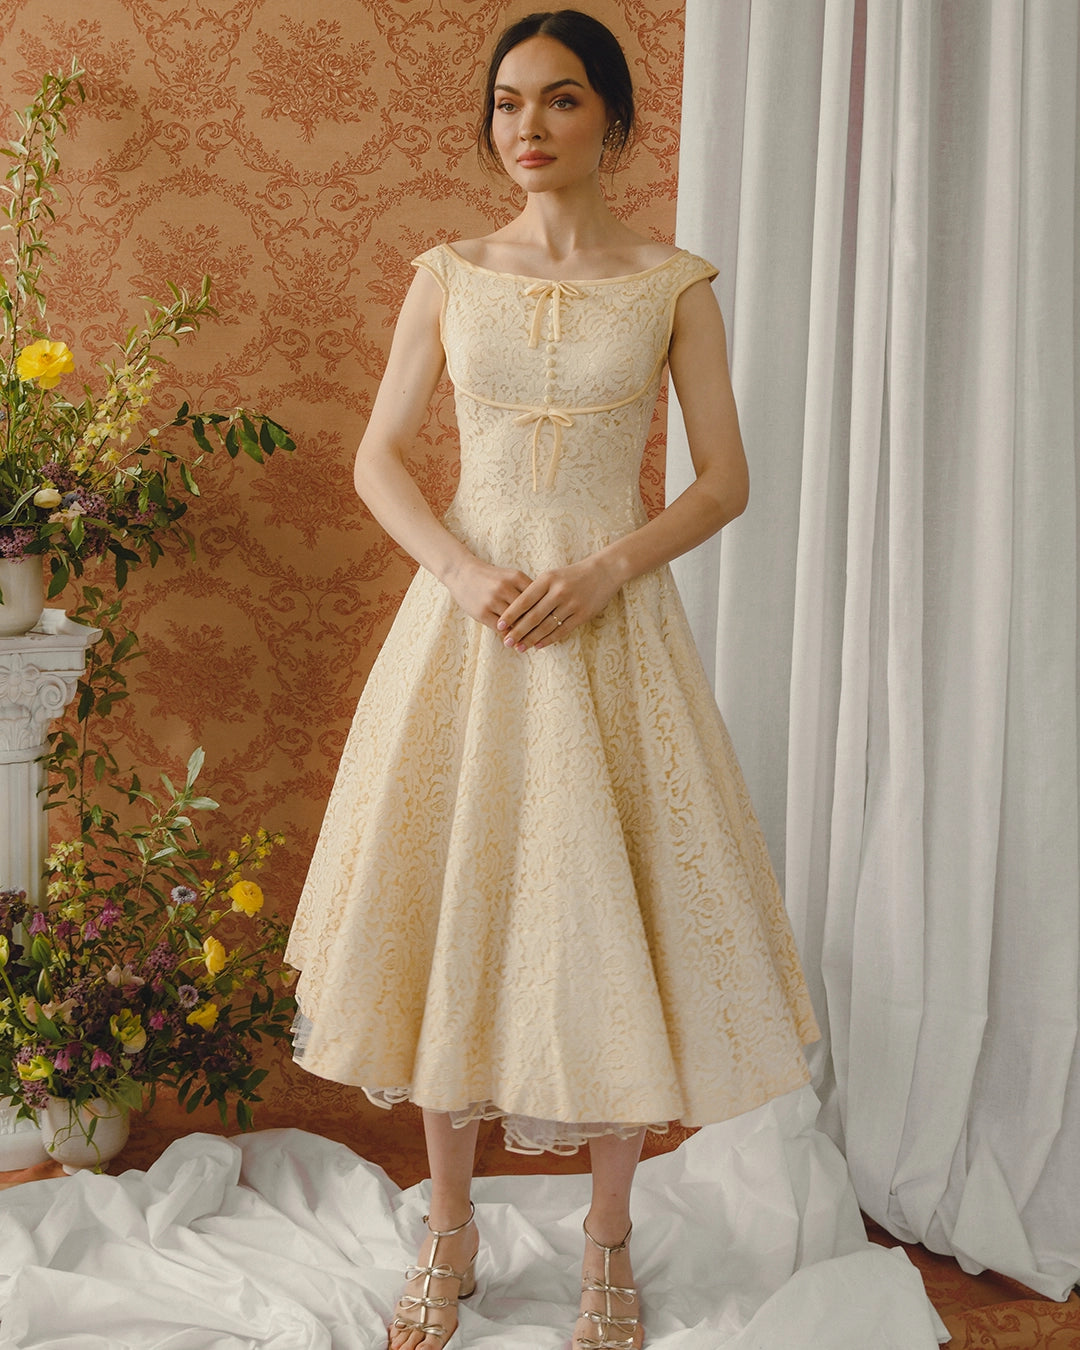 1950s Bateau-Neckline Cream Lace Fit And Flare Dress